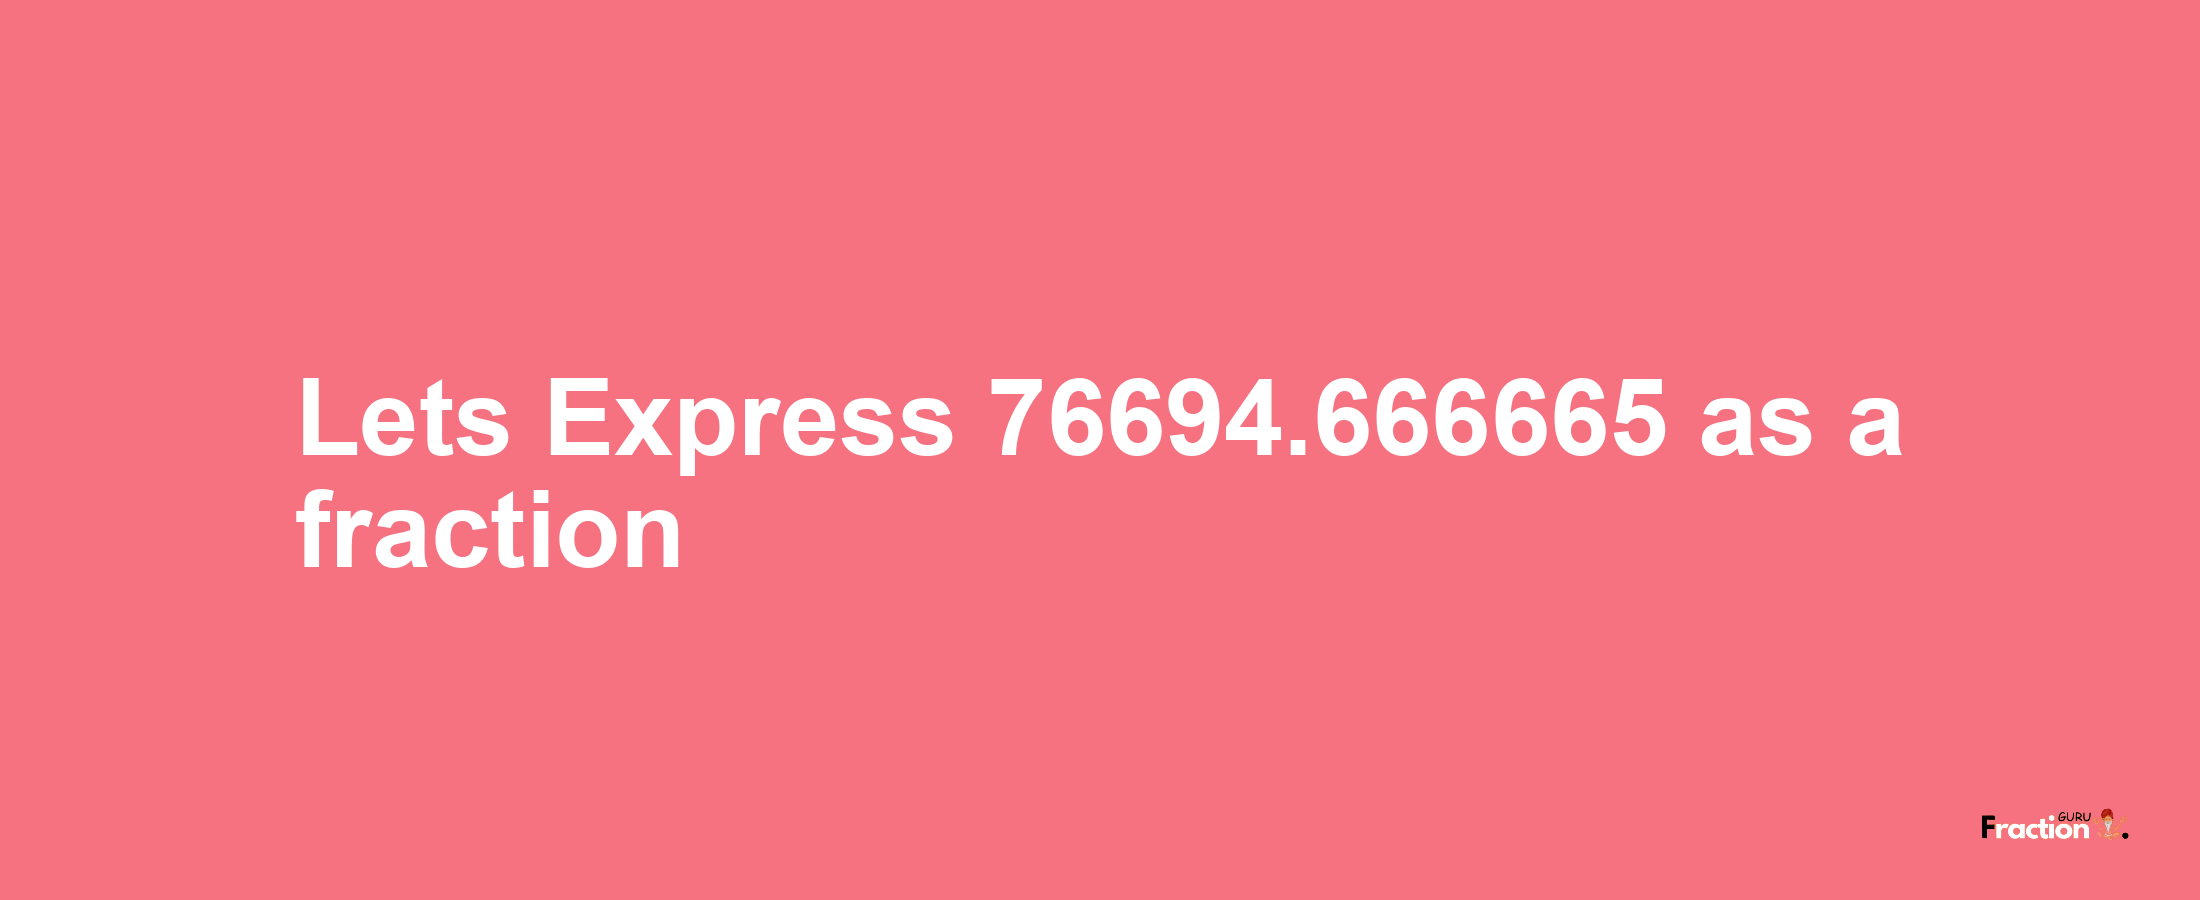 Lets Express 76694.666665 as afraction